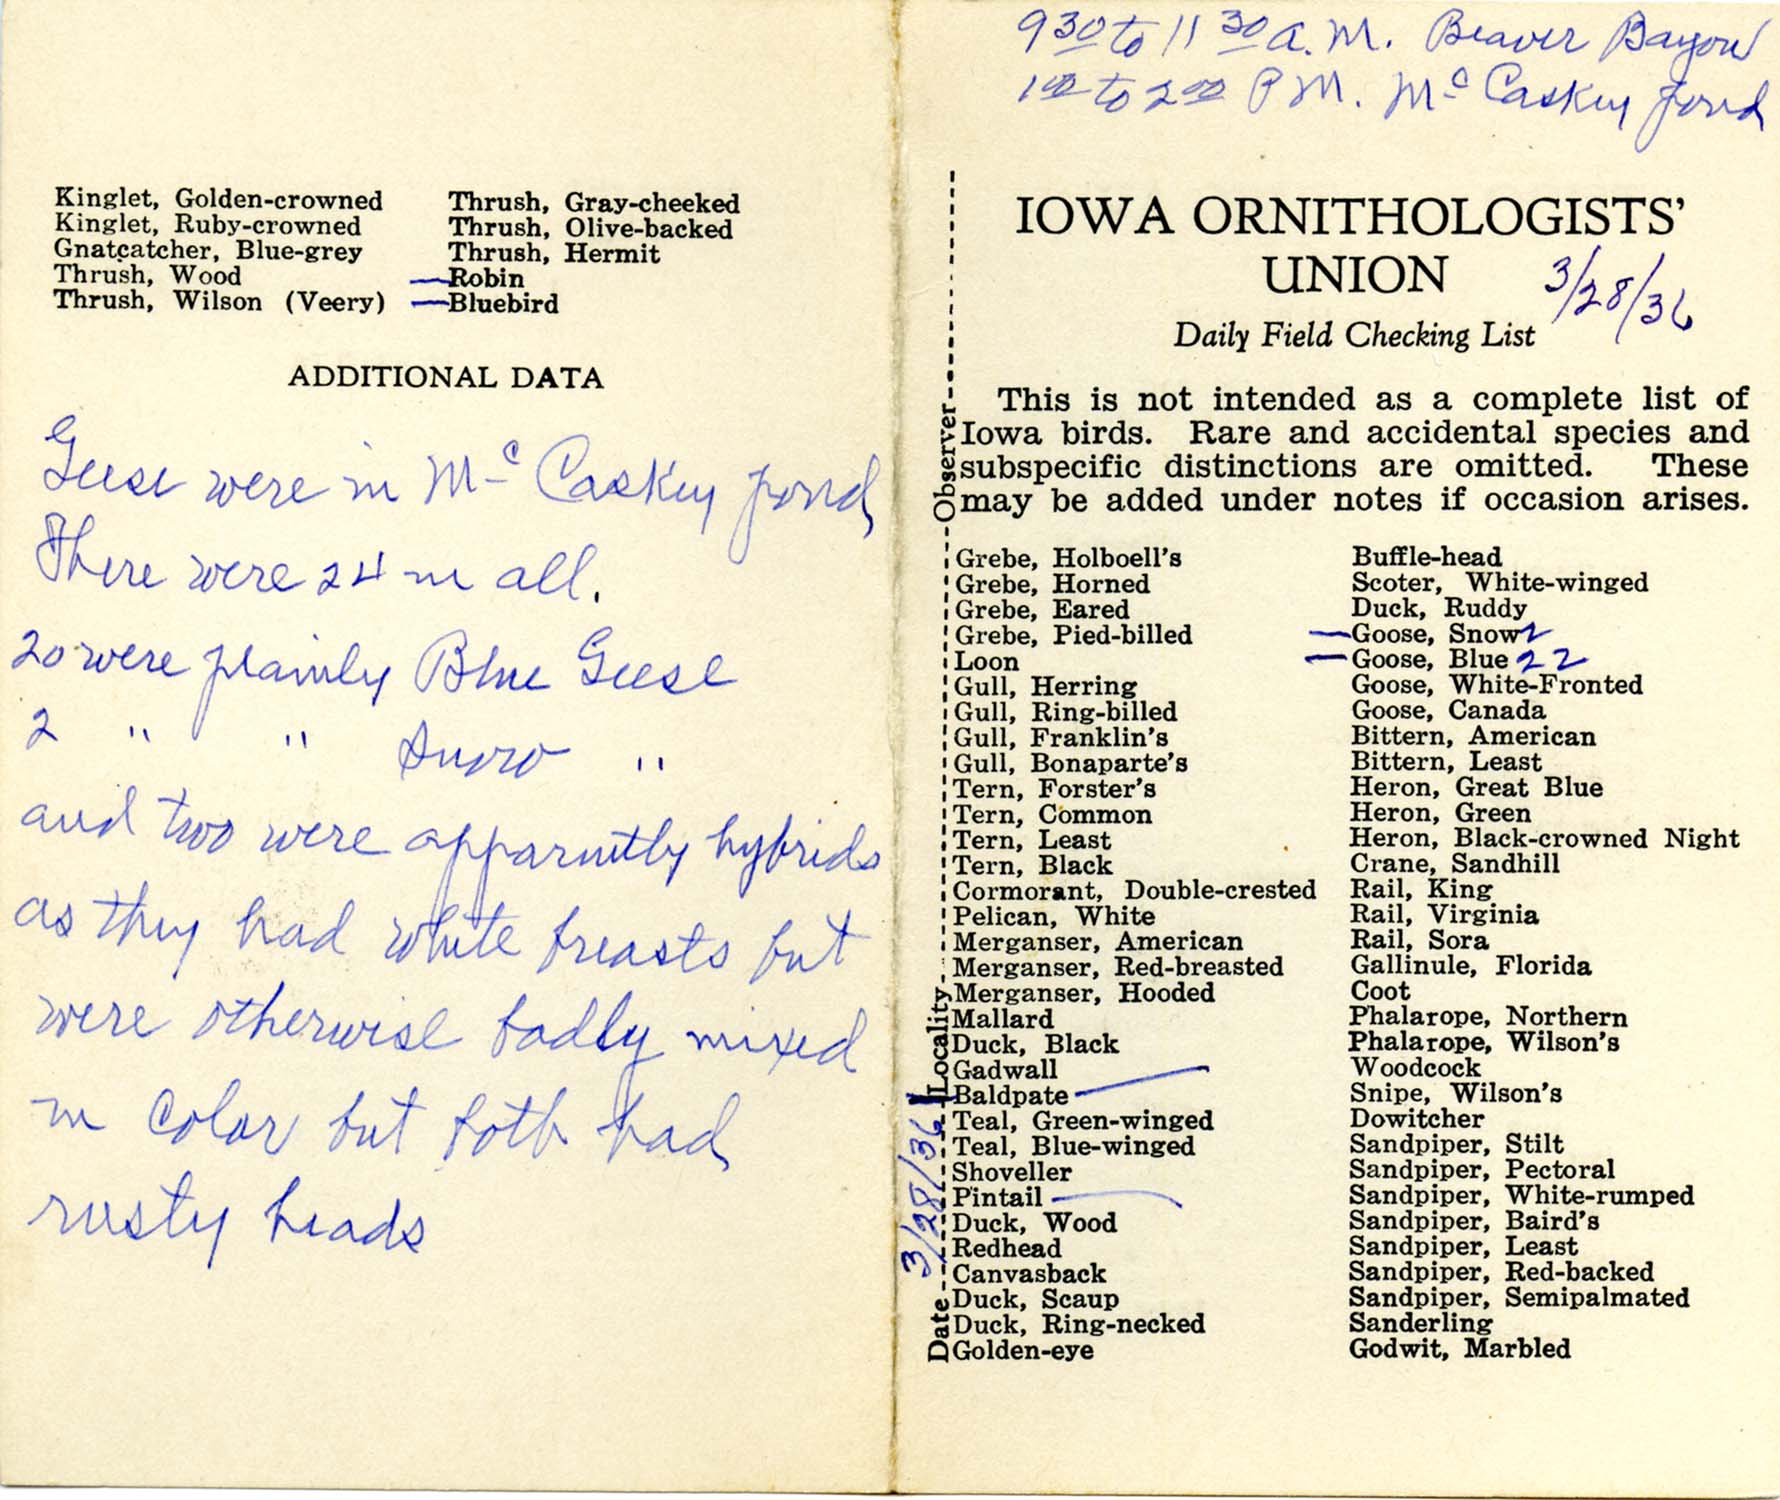 Daily field checking list by Walter Rosene, March 28, 1936